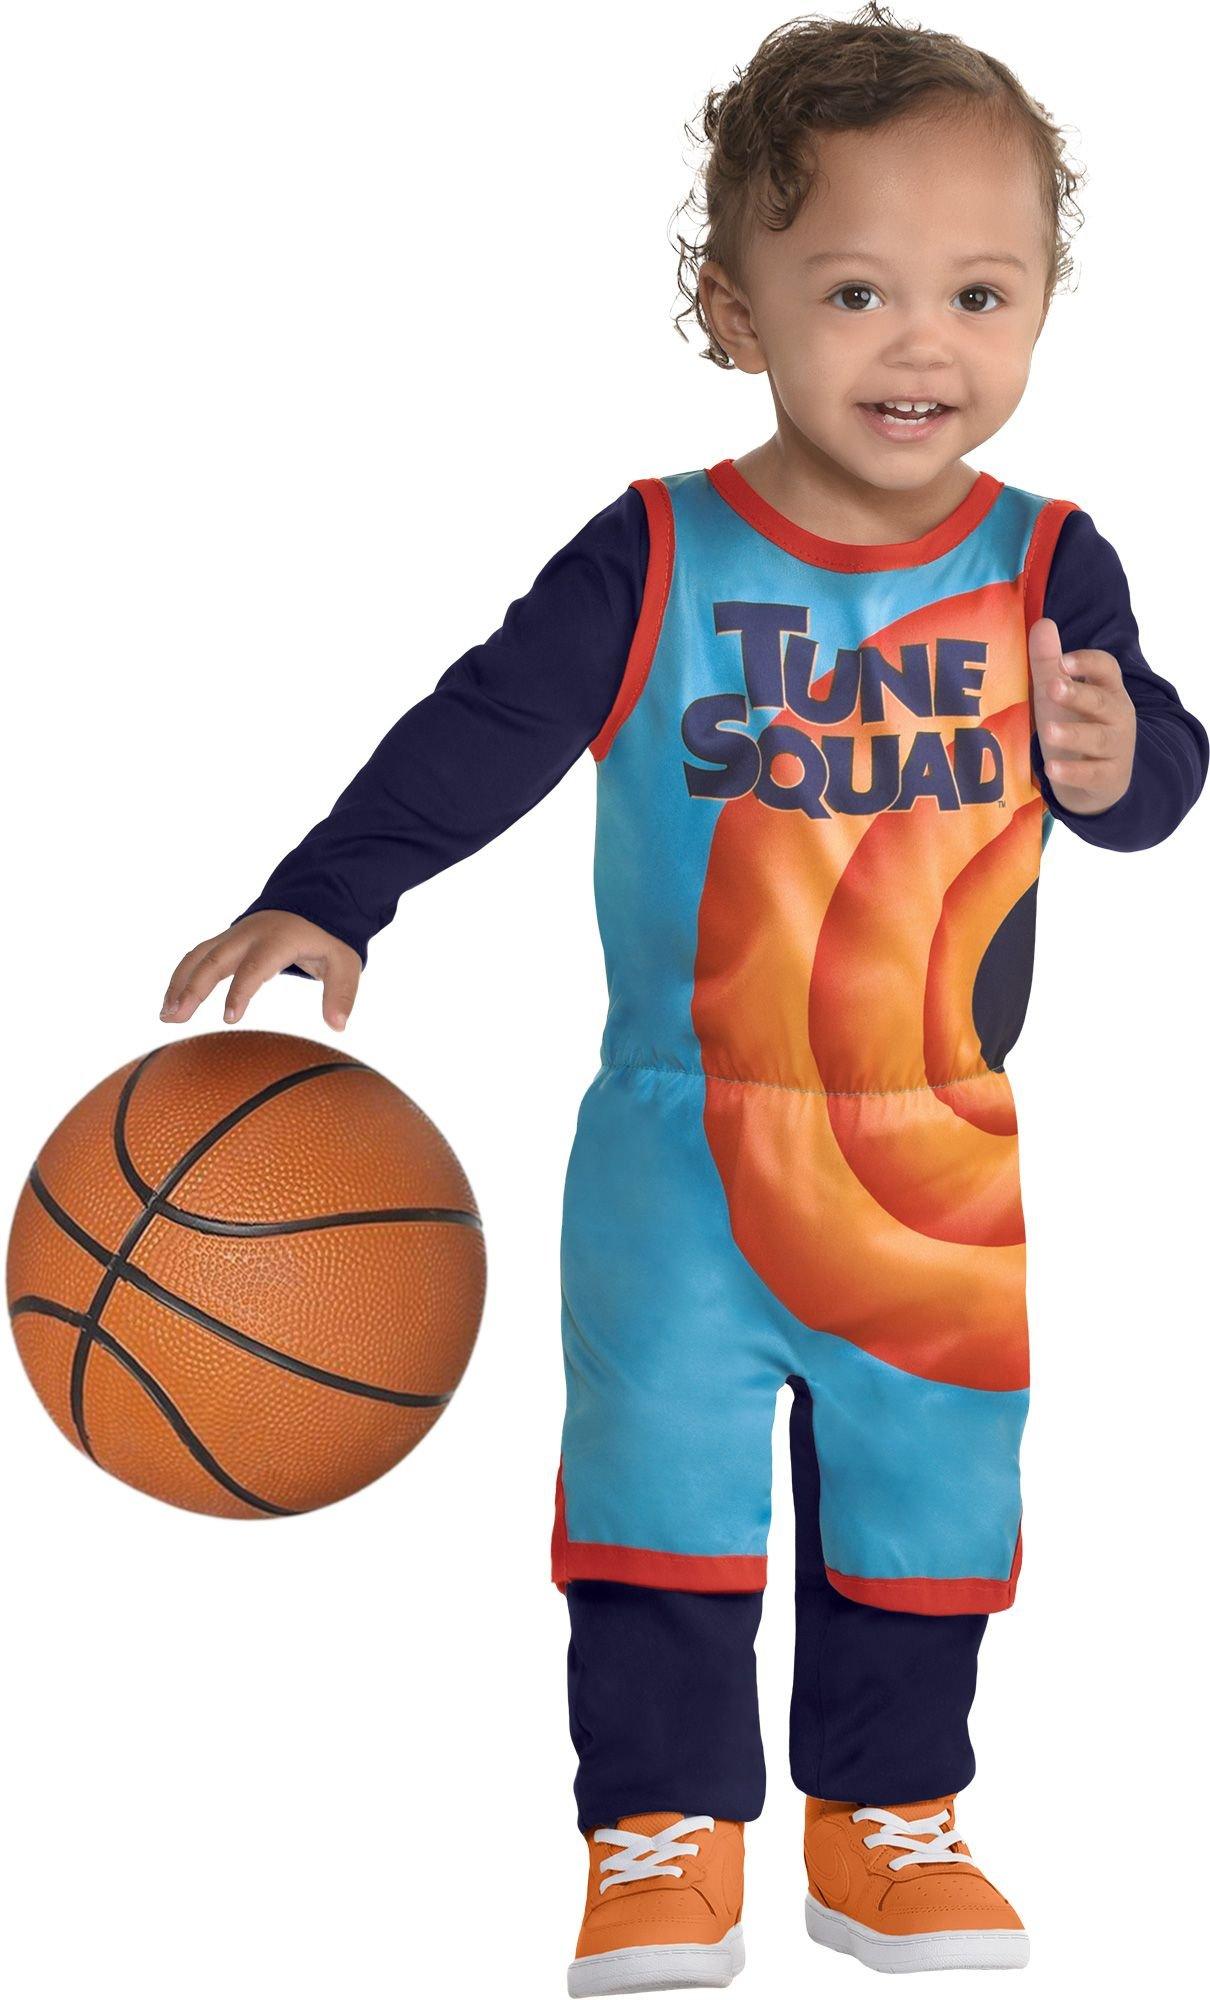 Boys Girls Space Jam 2 Jersey Clothes Tune Squad Basketball